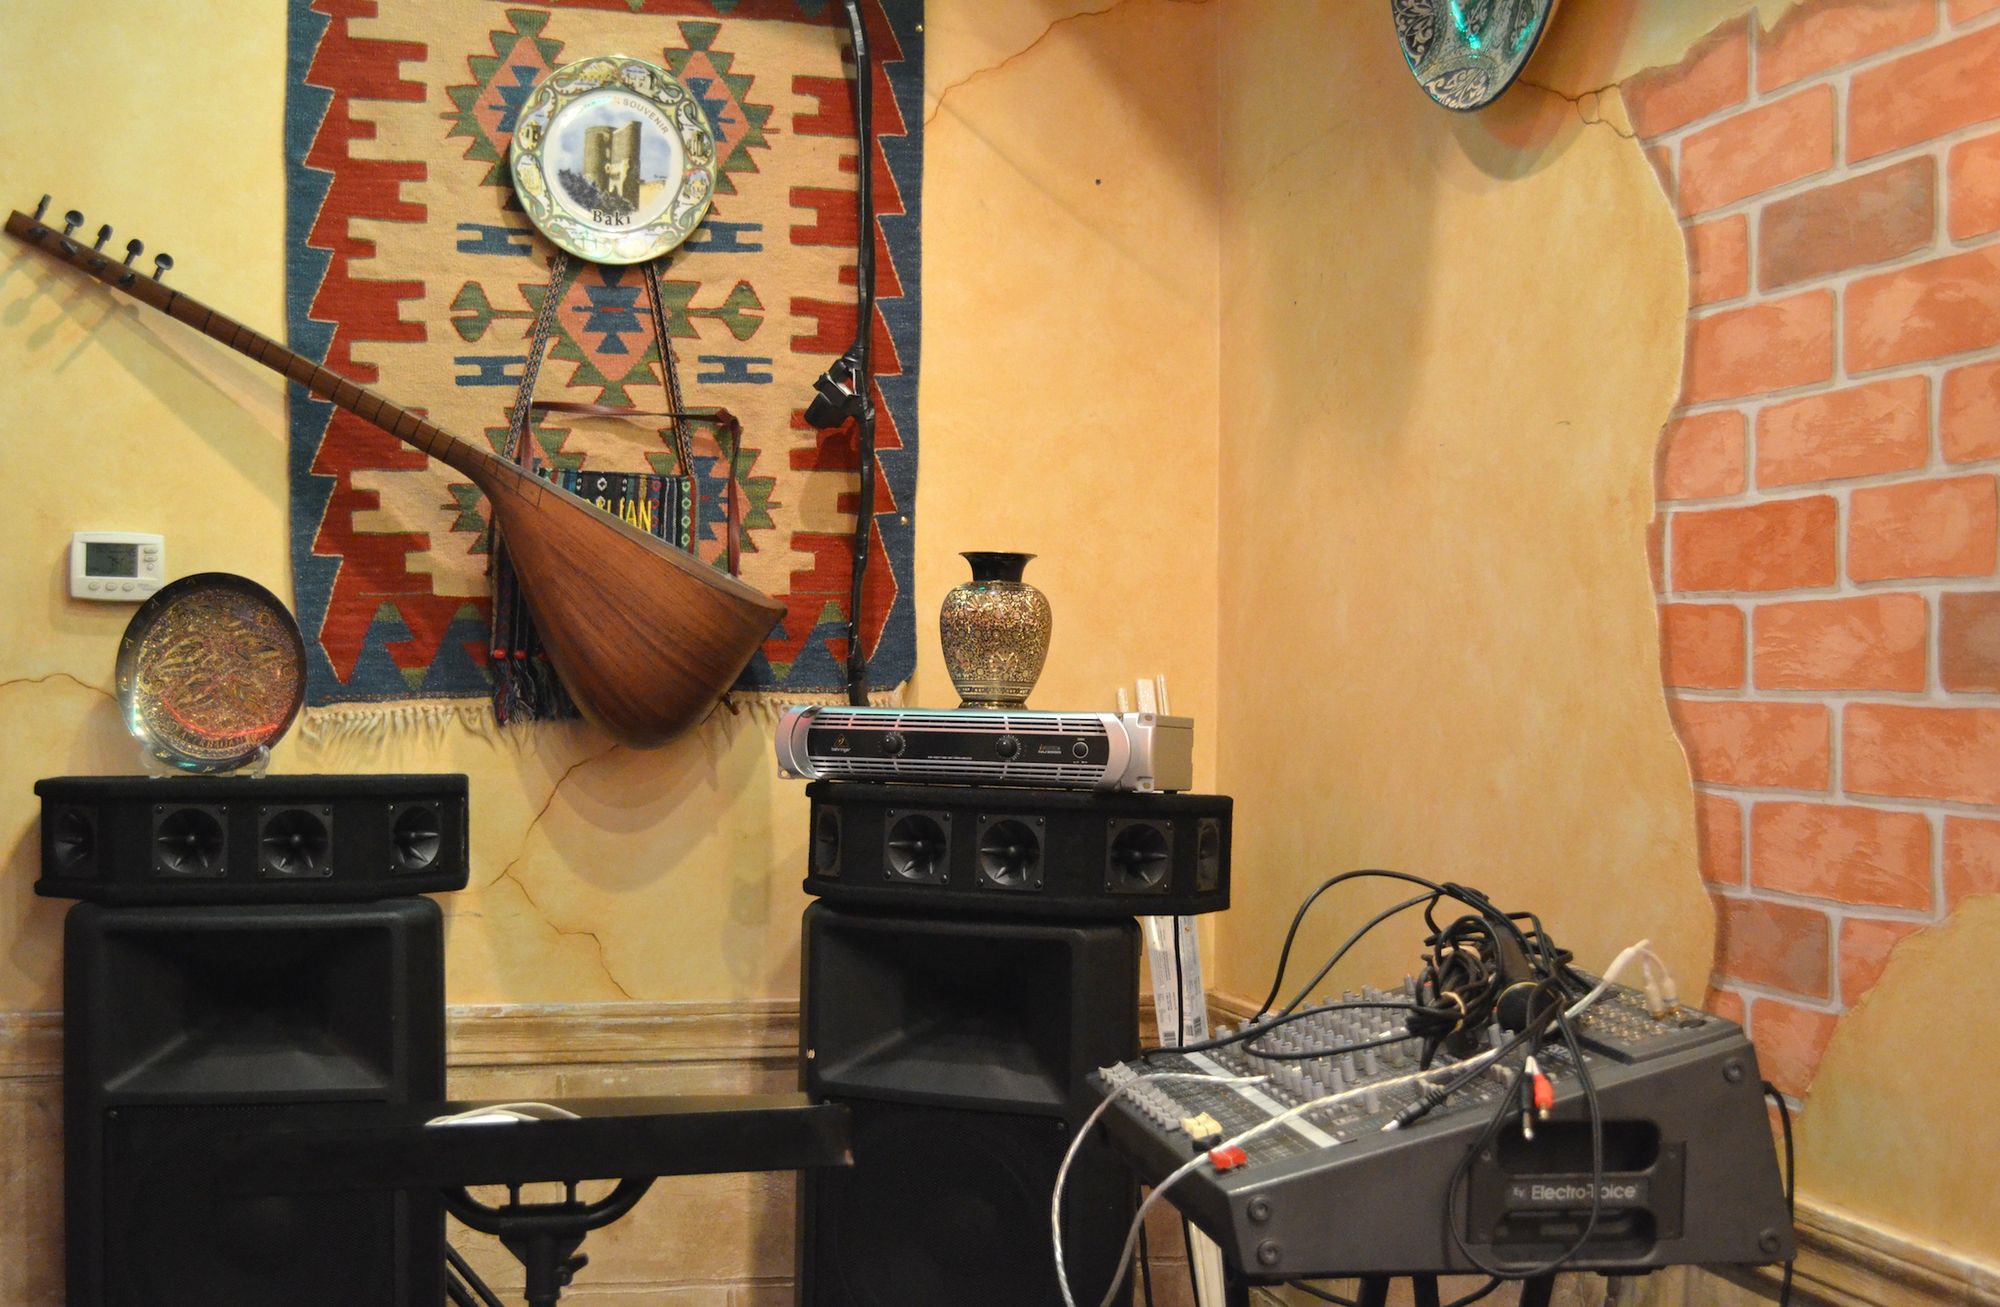 The sound equipment for live performances at Azarbaijan House.